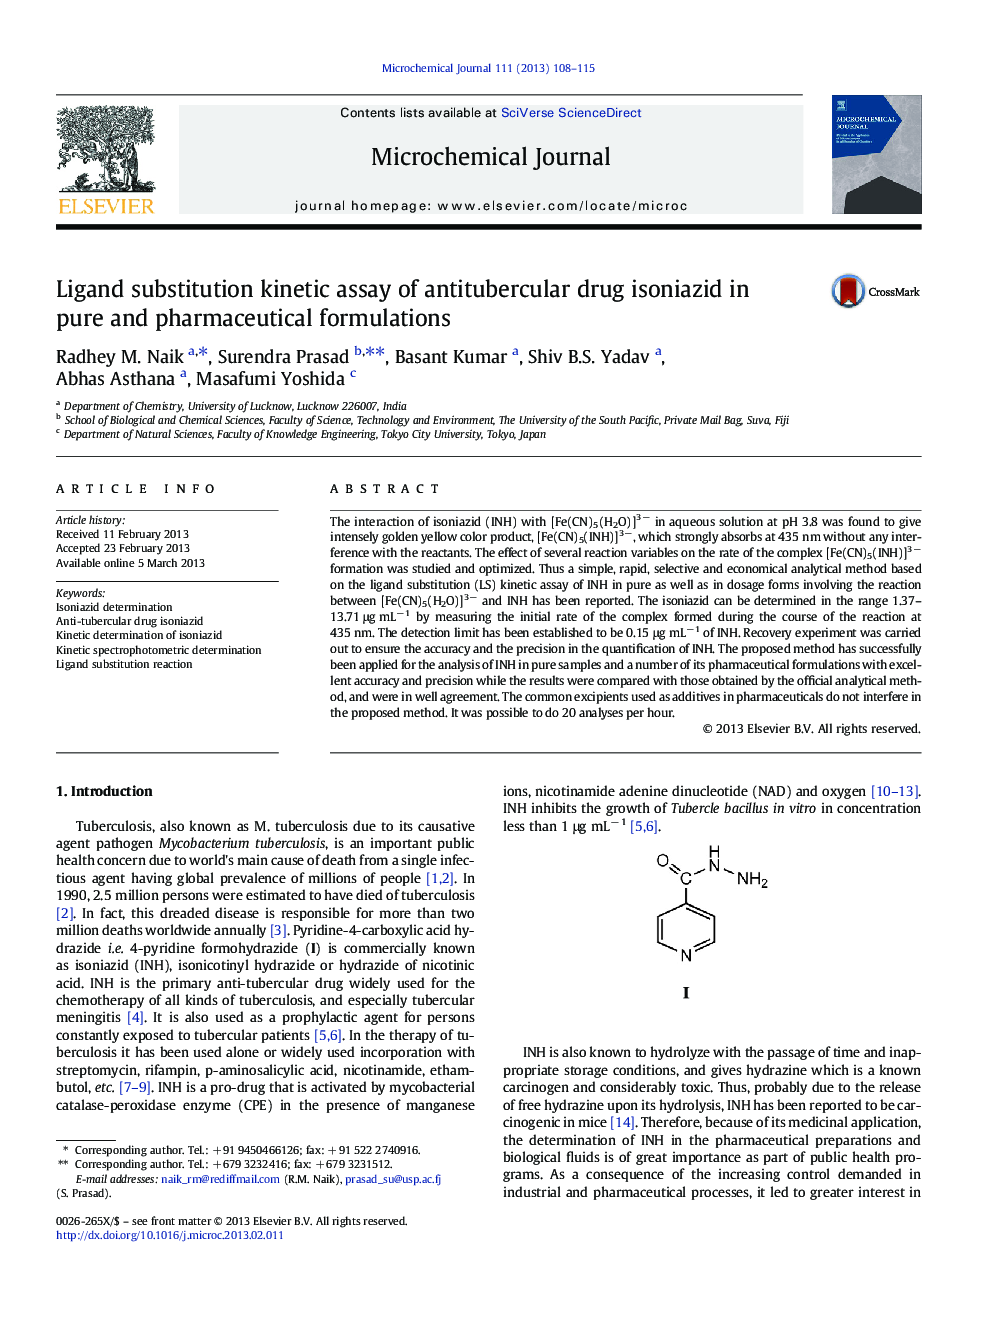 Ligand substitution kinetic assay of antitubercular drug isoniazid in pure and pharmaceutical formulations